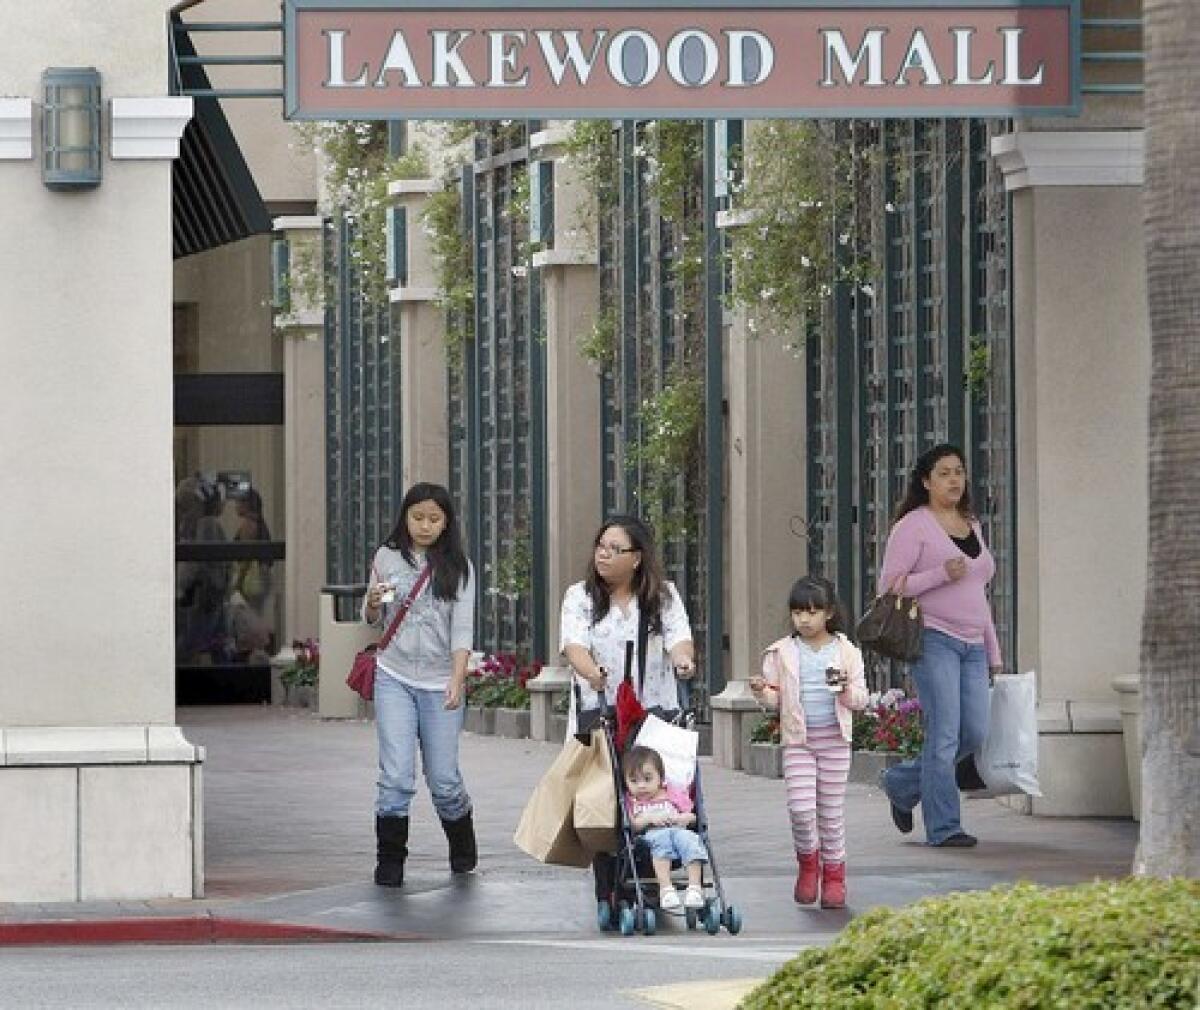 Shoppers leave Lakewood Mall in the traditionally white city north of Long Beach. Since 2000 the Asian population has increased 17% and the Latino population 20%.